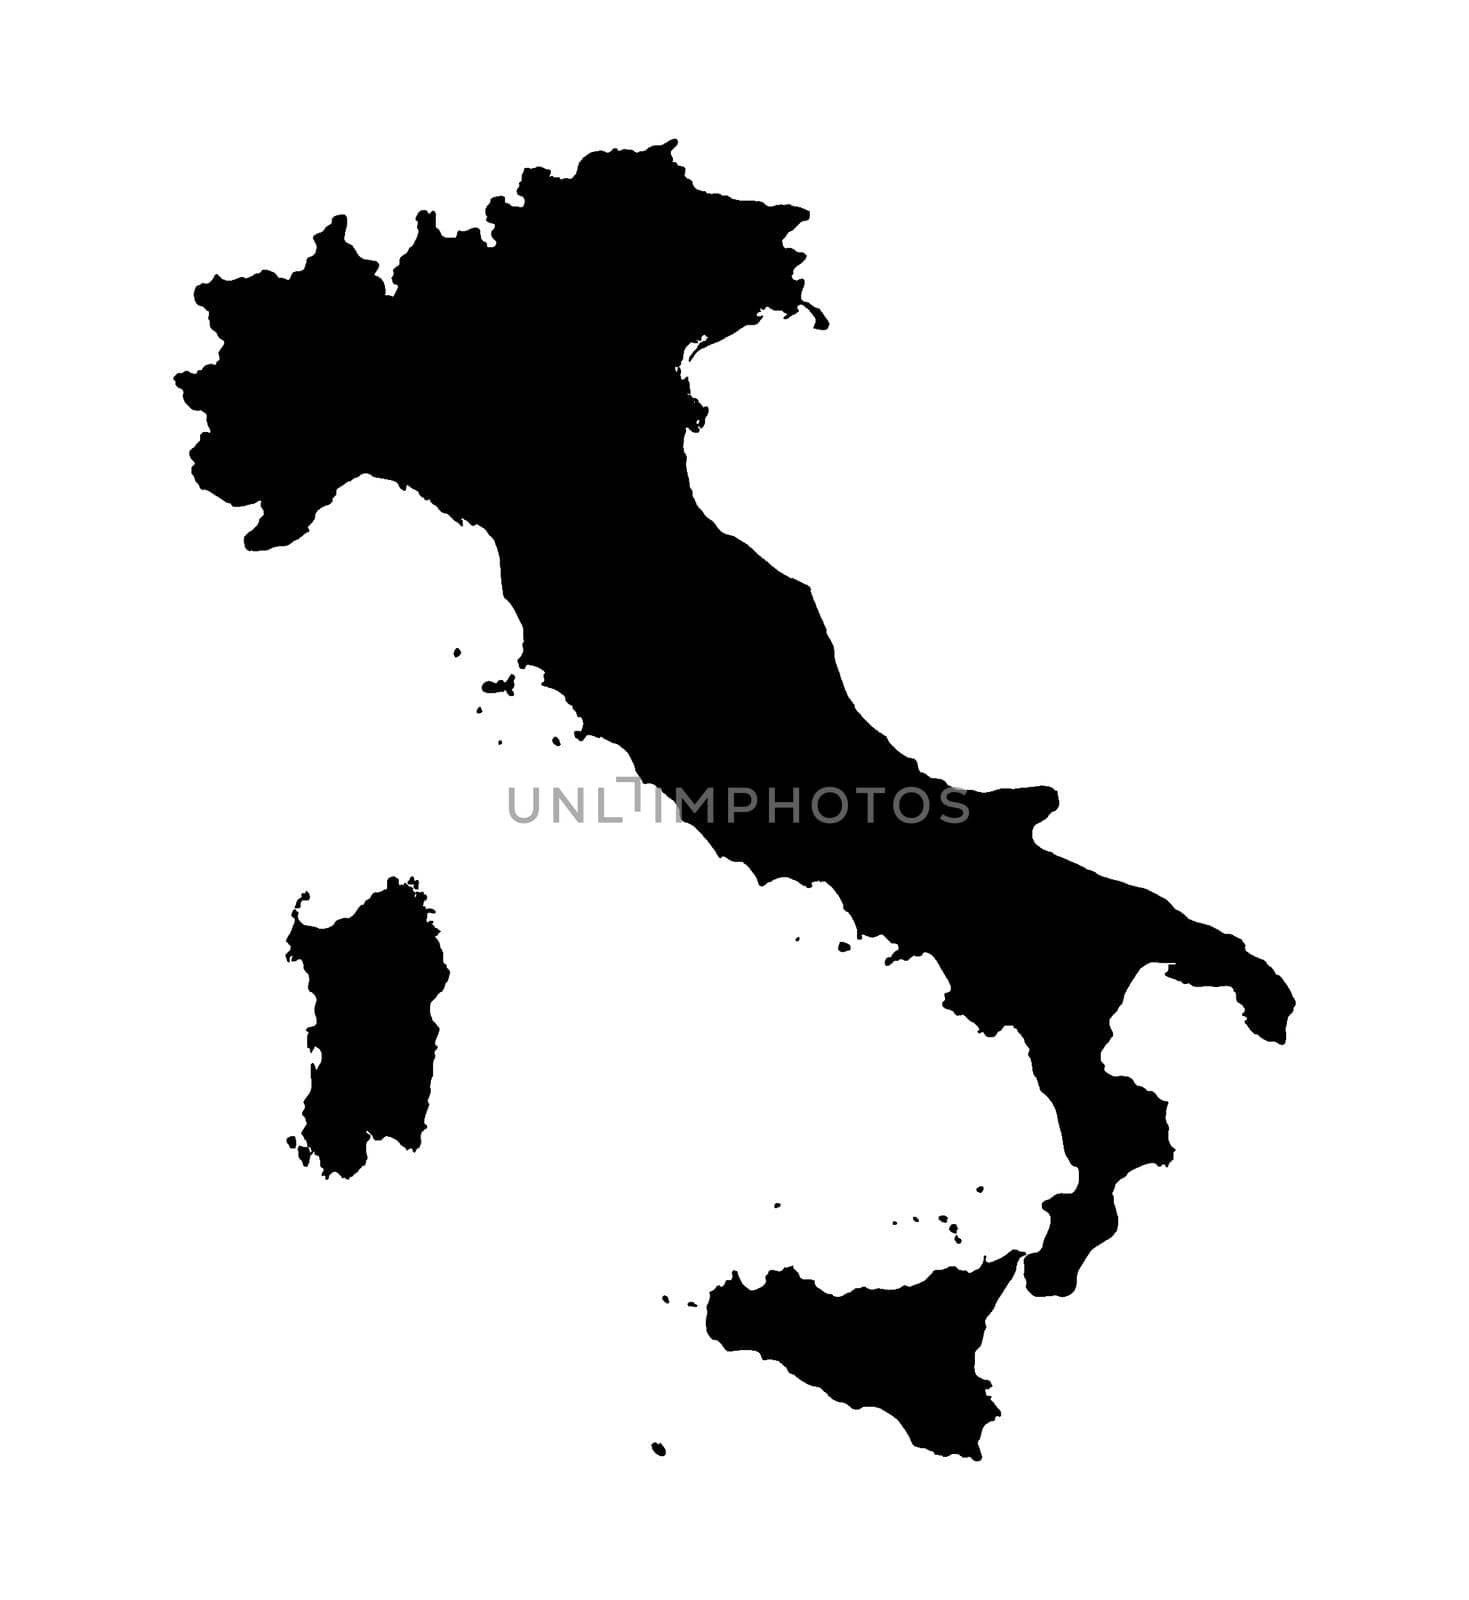 Outline silhouette map of Italy set over a white background